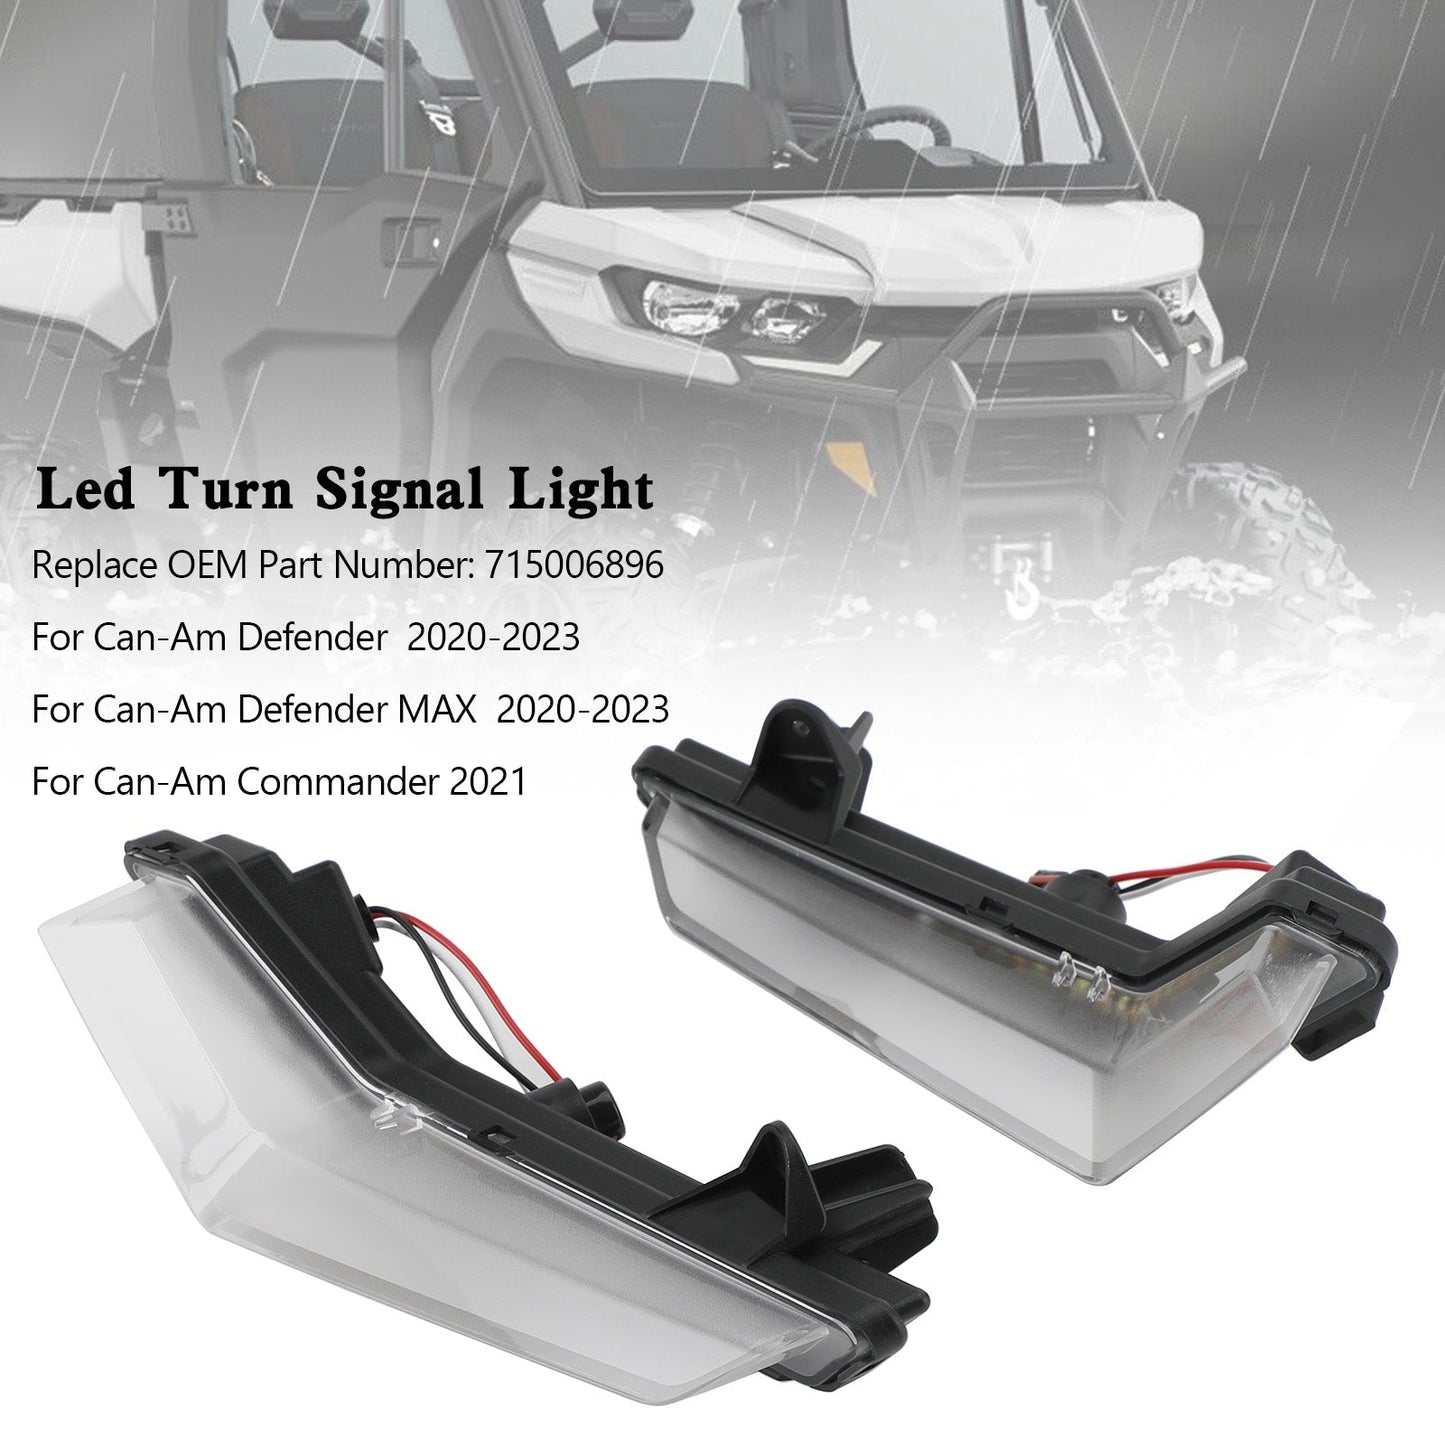 2021 Can-Am Commander LED Front Turn Signals Light Daytime Running 715006896